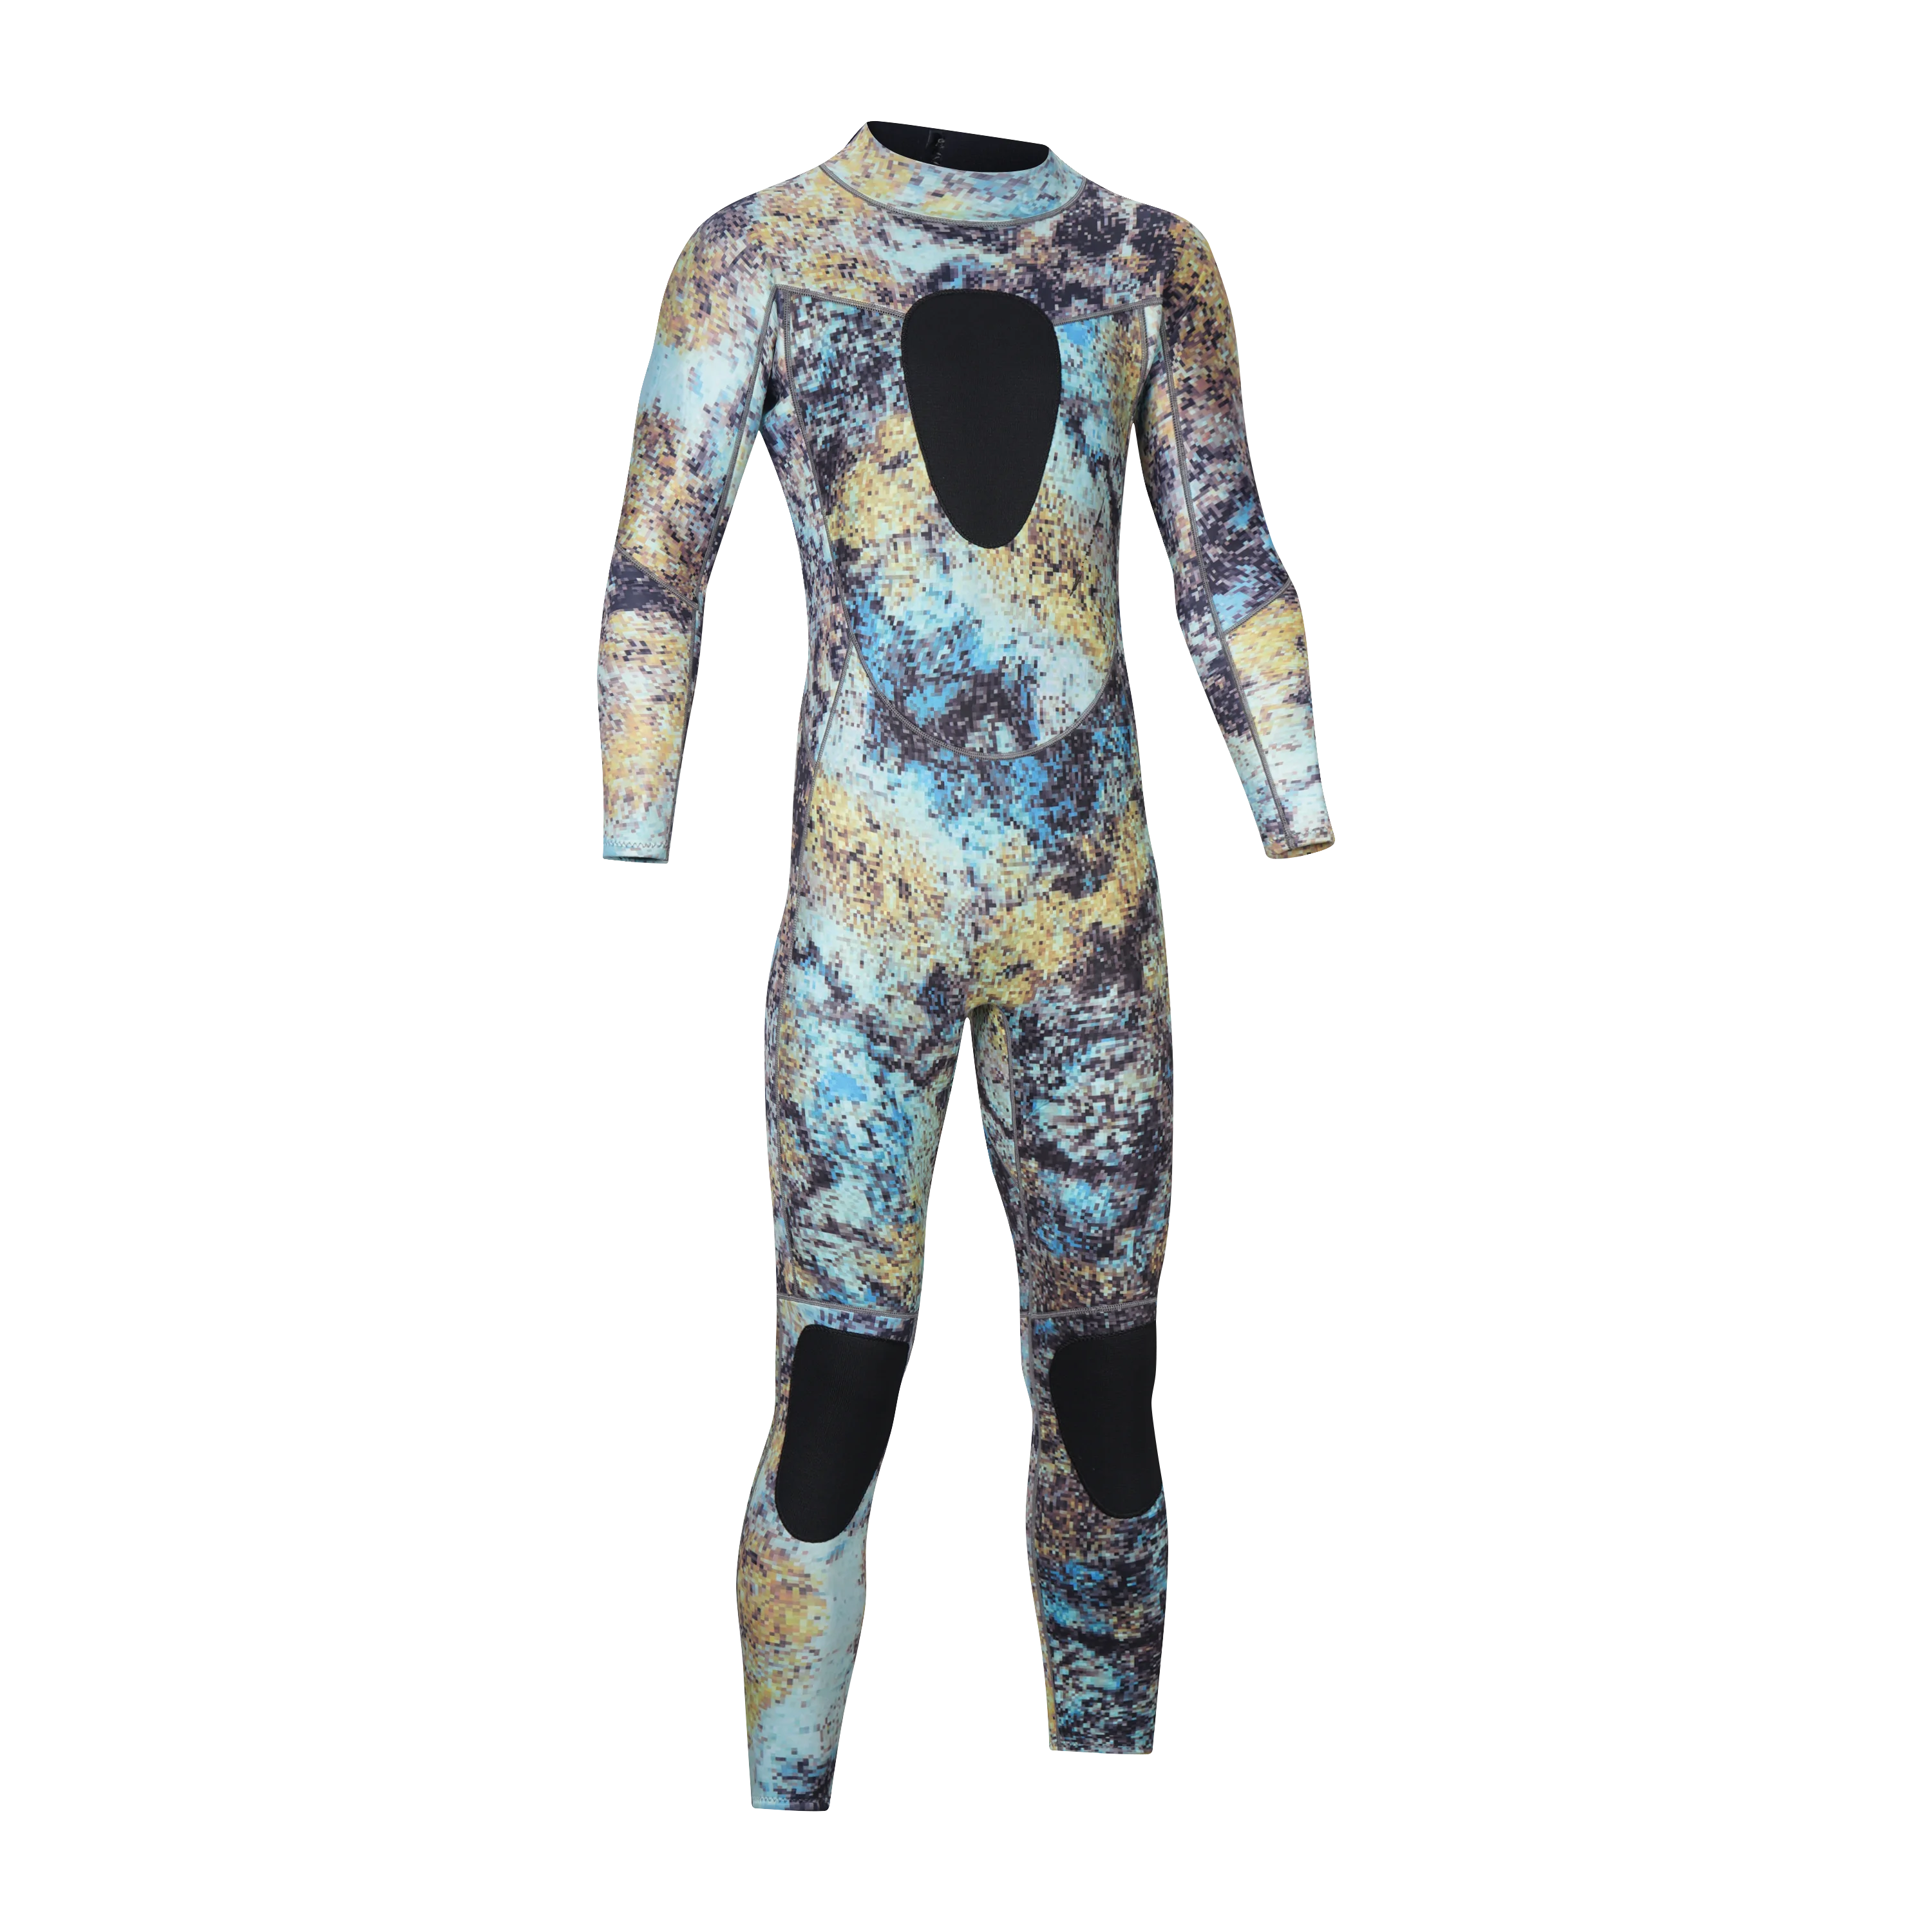 https://ae01.alicdn.com/kf/S0b6ef3c5785e47a18d565e7c25bf8084Z/Men-s-Camouflage-Spearfishing-Wetsuit-3mm-Neoprene-Camouflage-Full-Body-Wetsuit-for-Snorkeling-Swim-Surfers.png